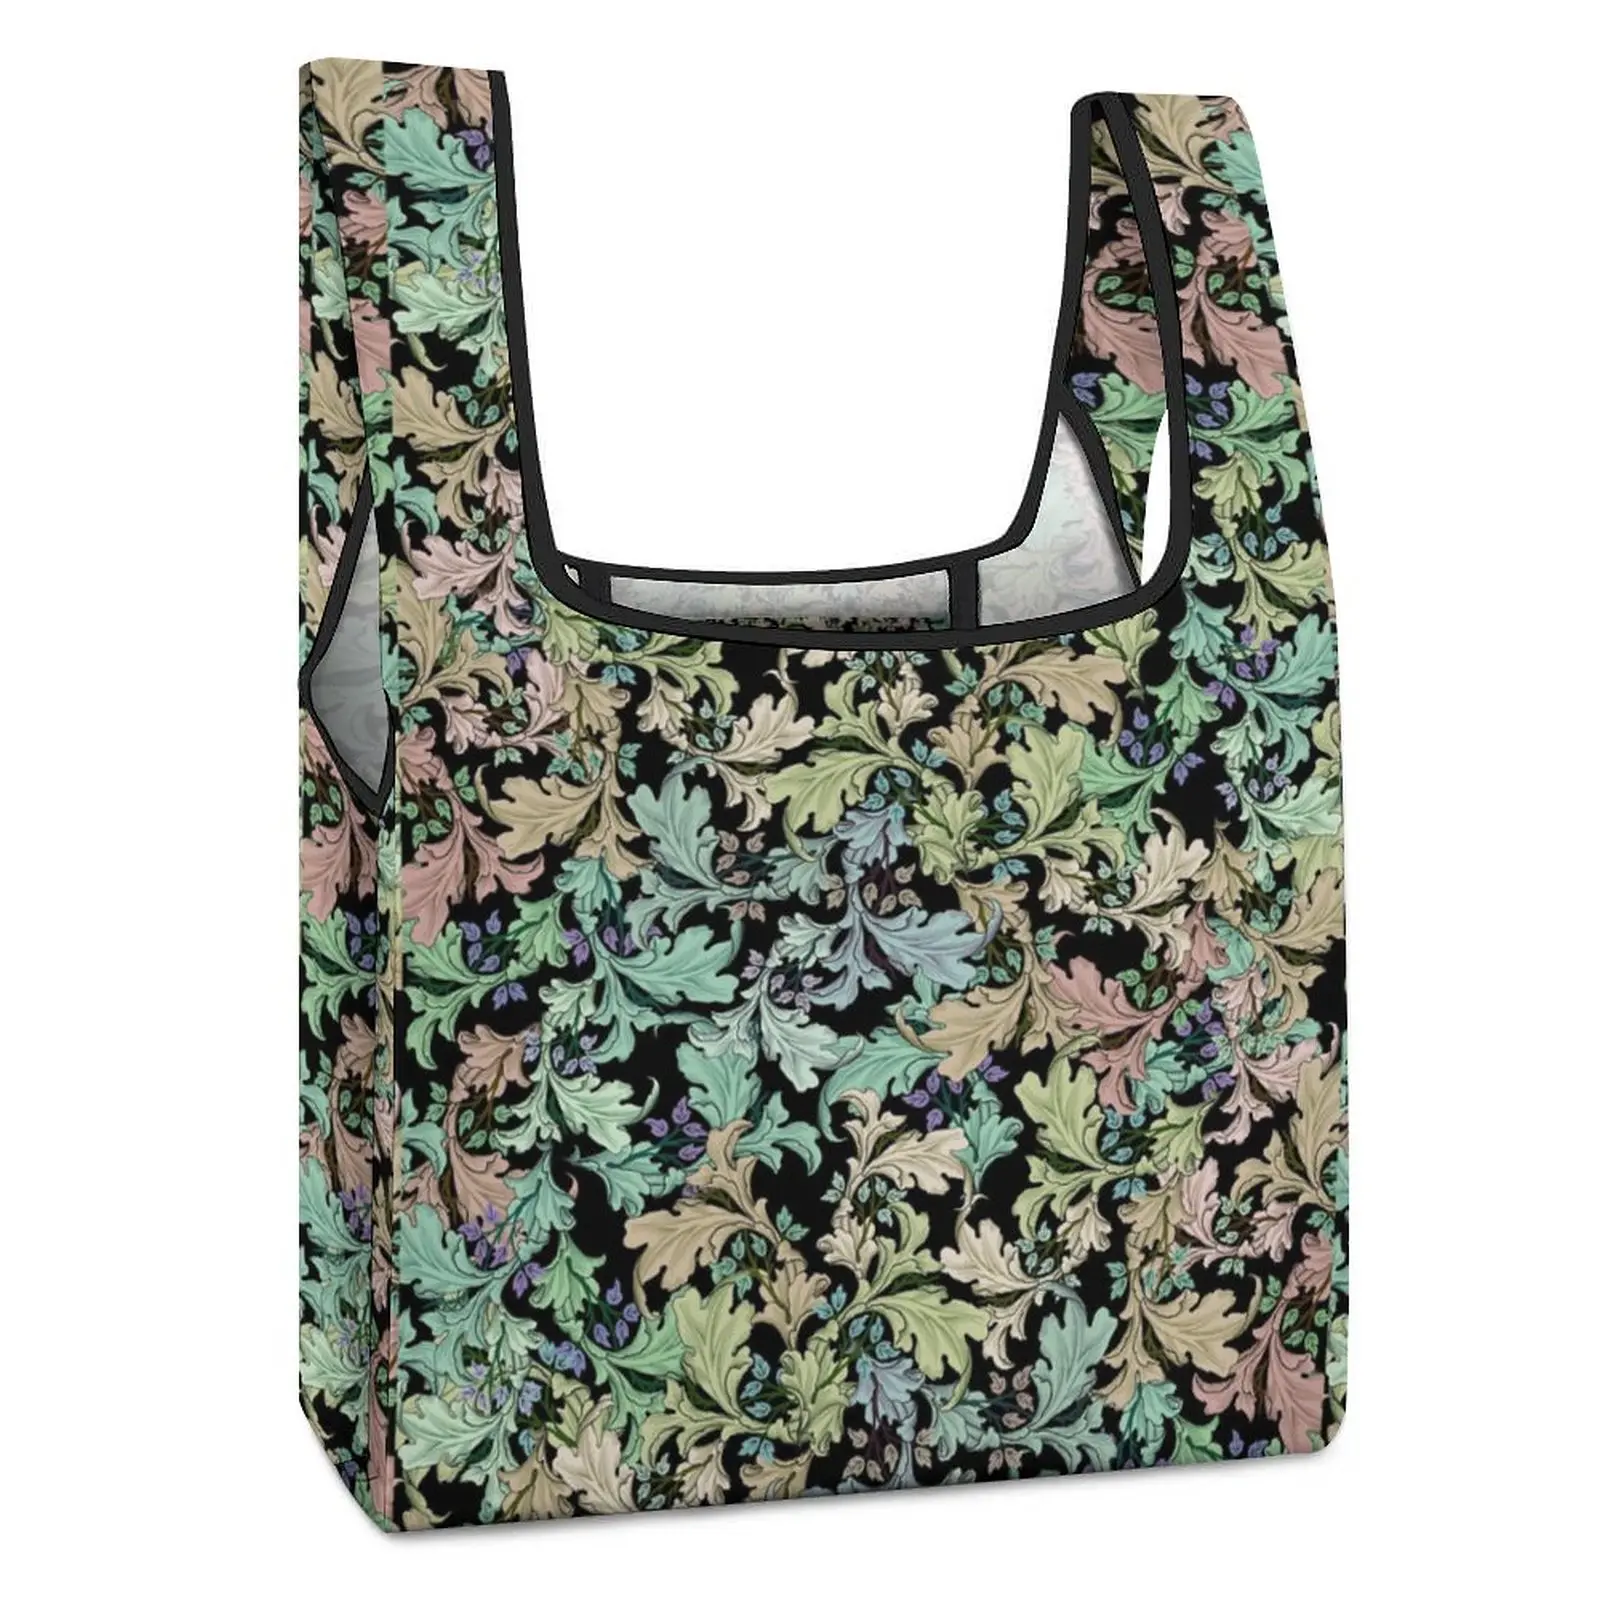 Colorful Leaf Printing Waterproof Foldable Shopping Bags Double Strap Handbag Tote Casual Woman Grocery Bag Custom Pattern